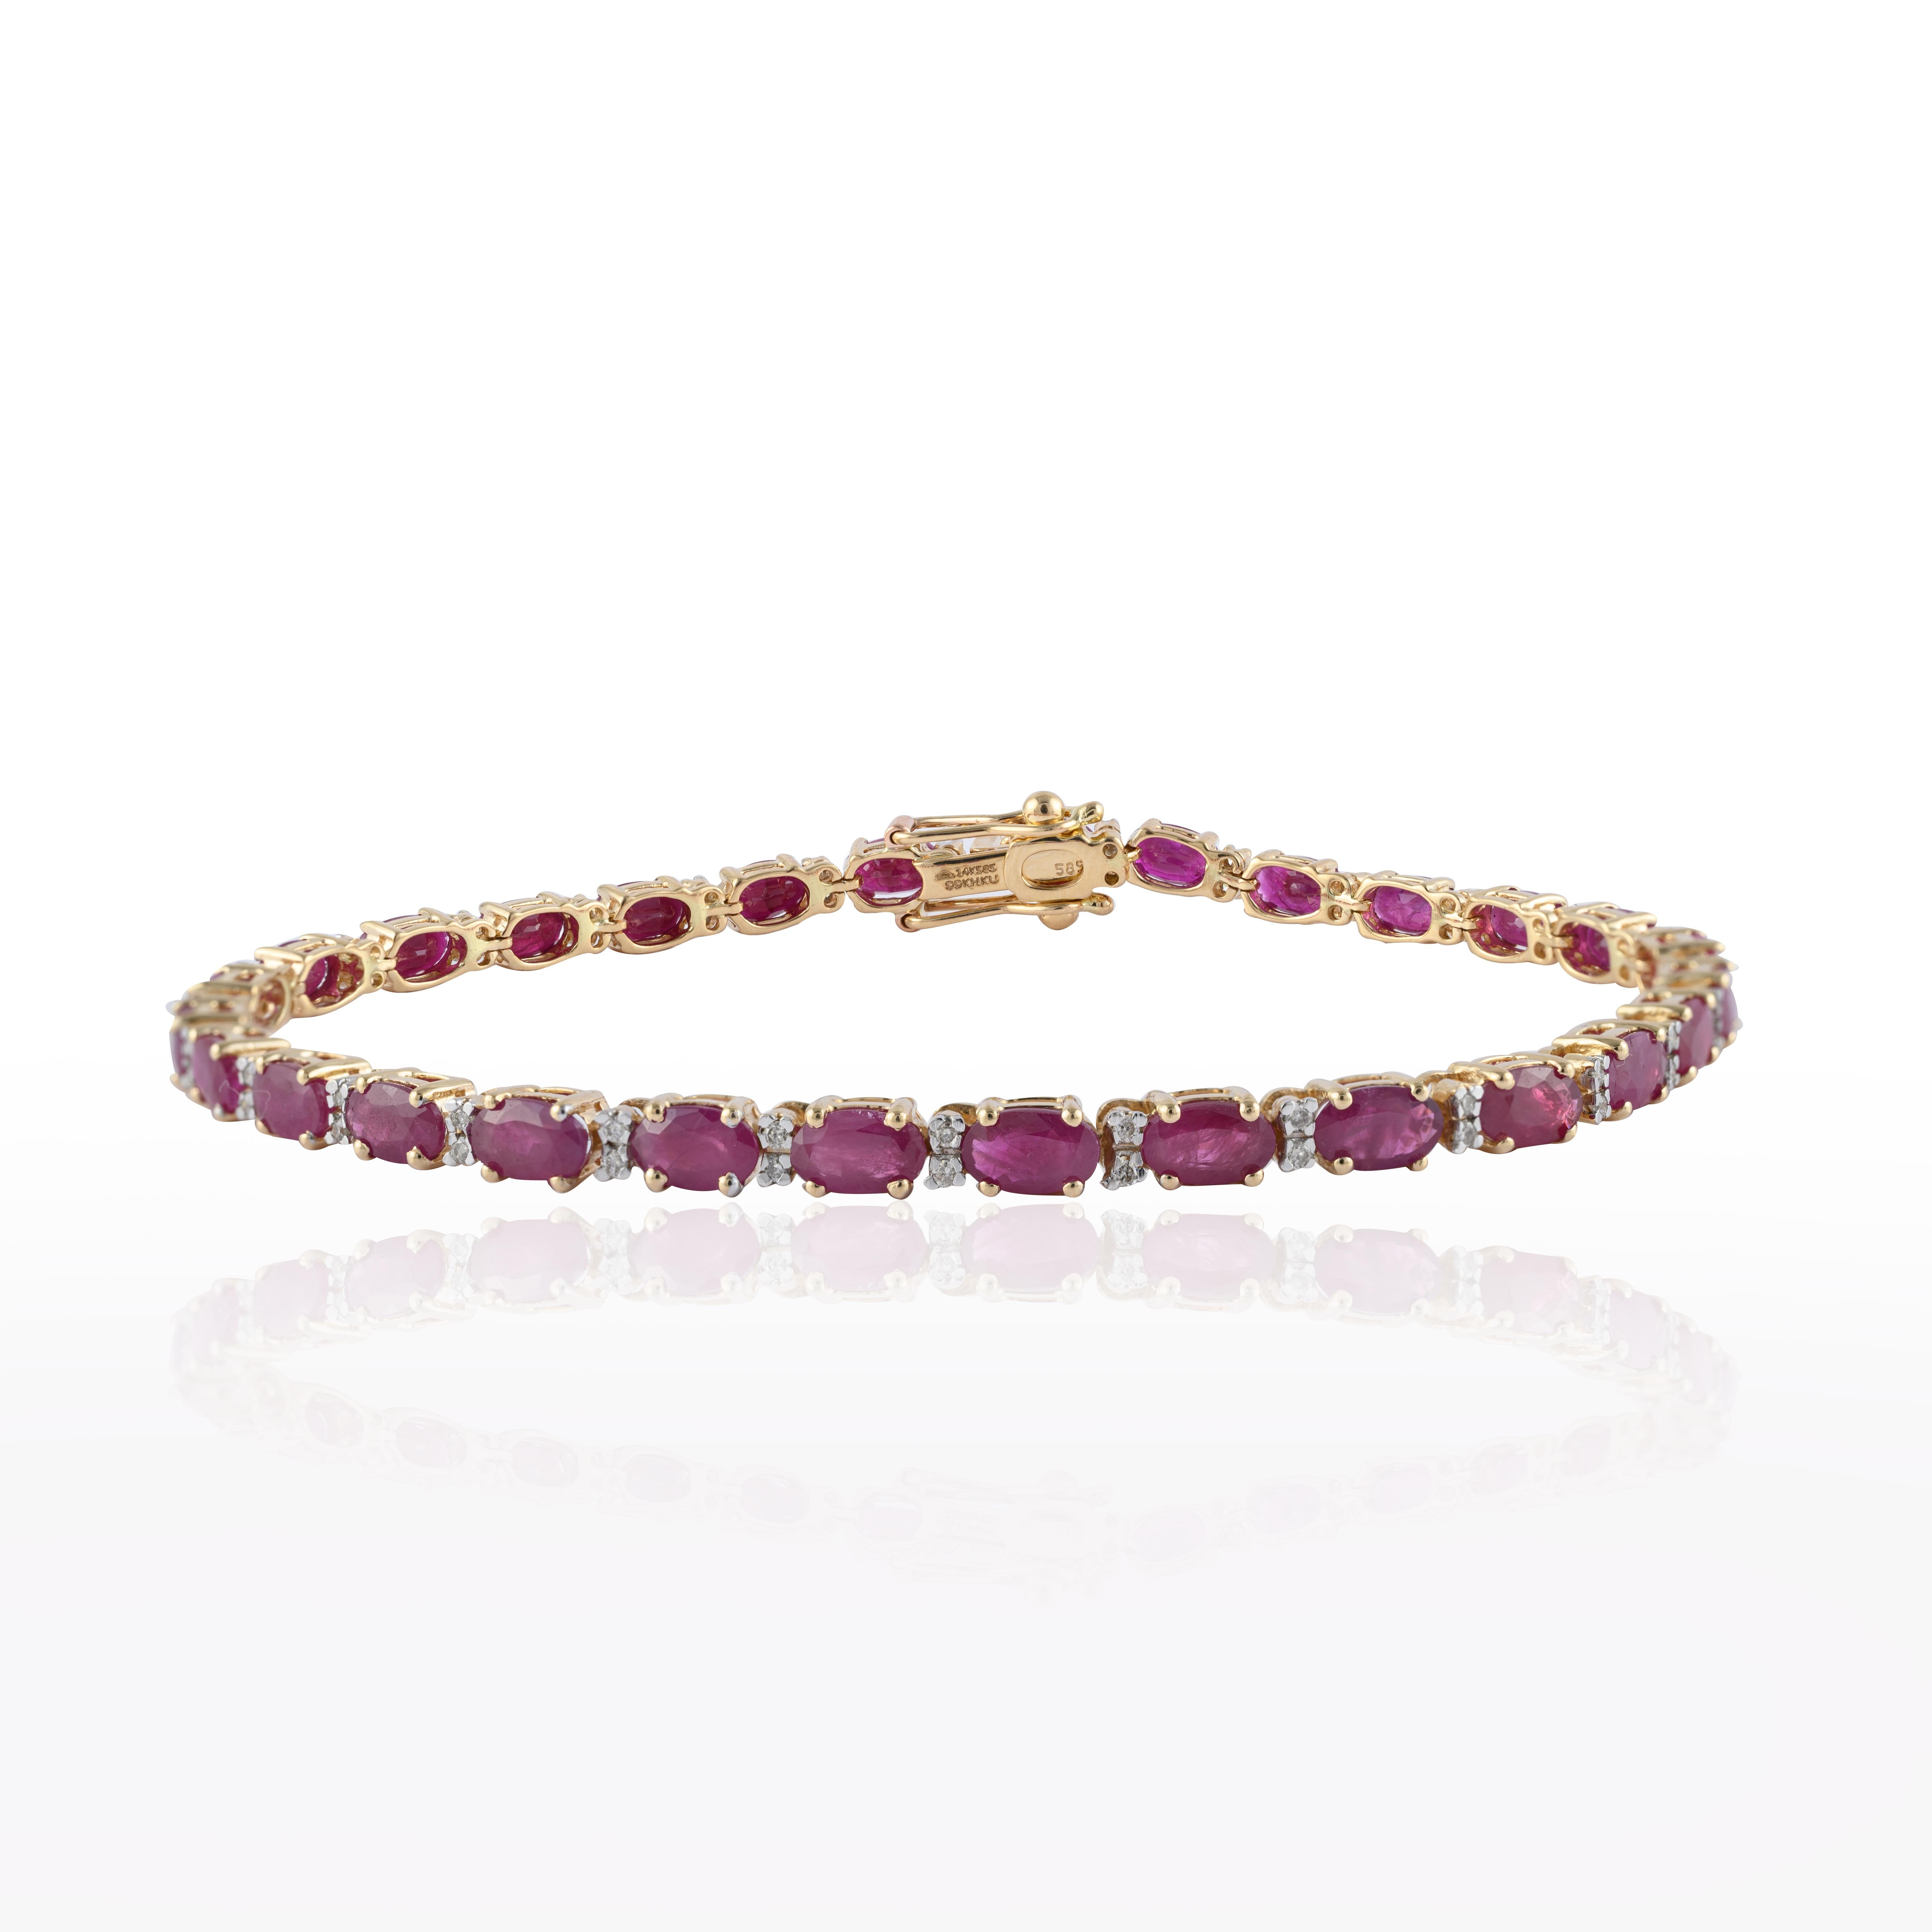 Contemporary 9.36 Carat Genuine Ruby Diamond Tennis Bracelet in 14K Solid Yellow Gold For Sale